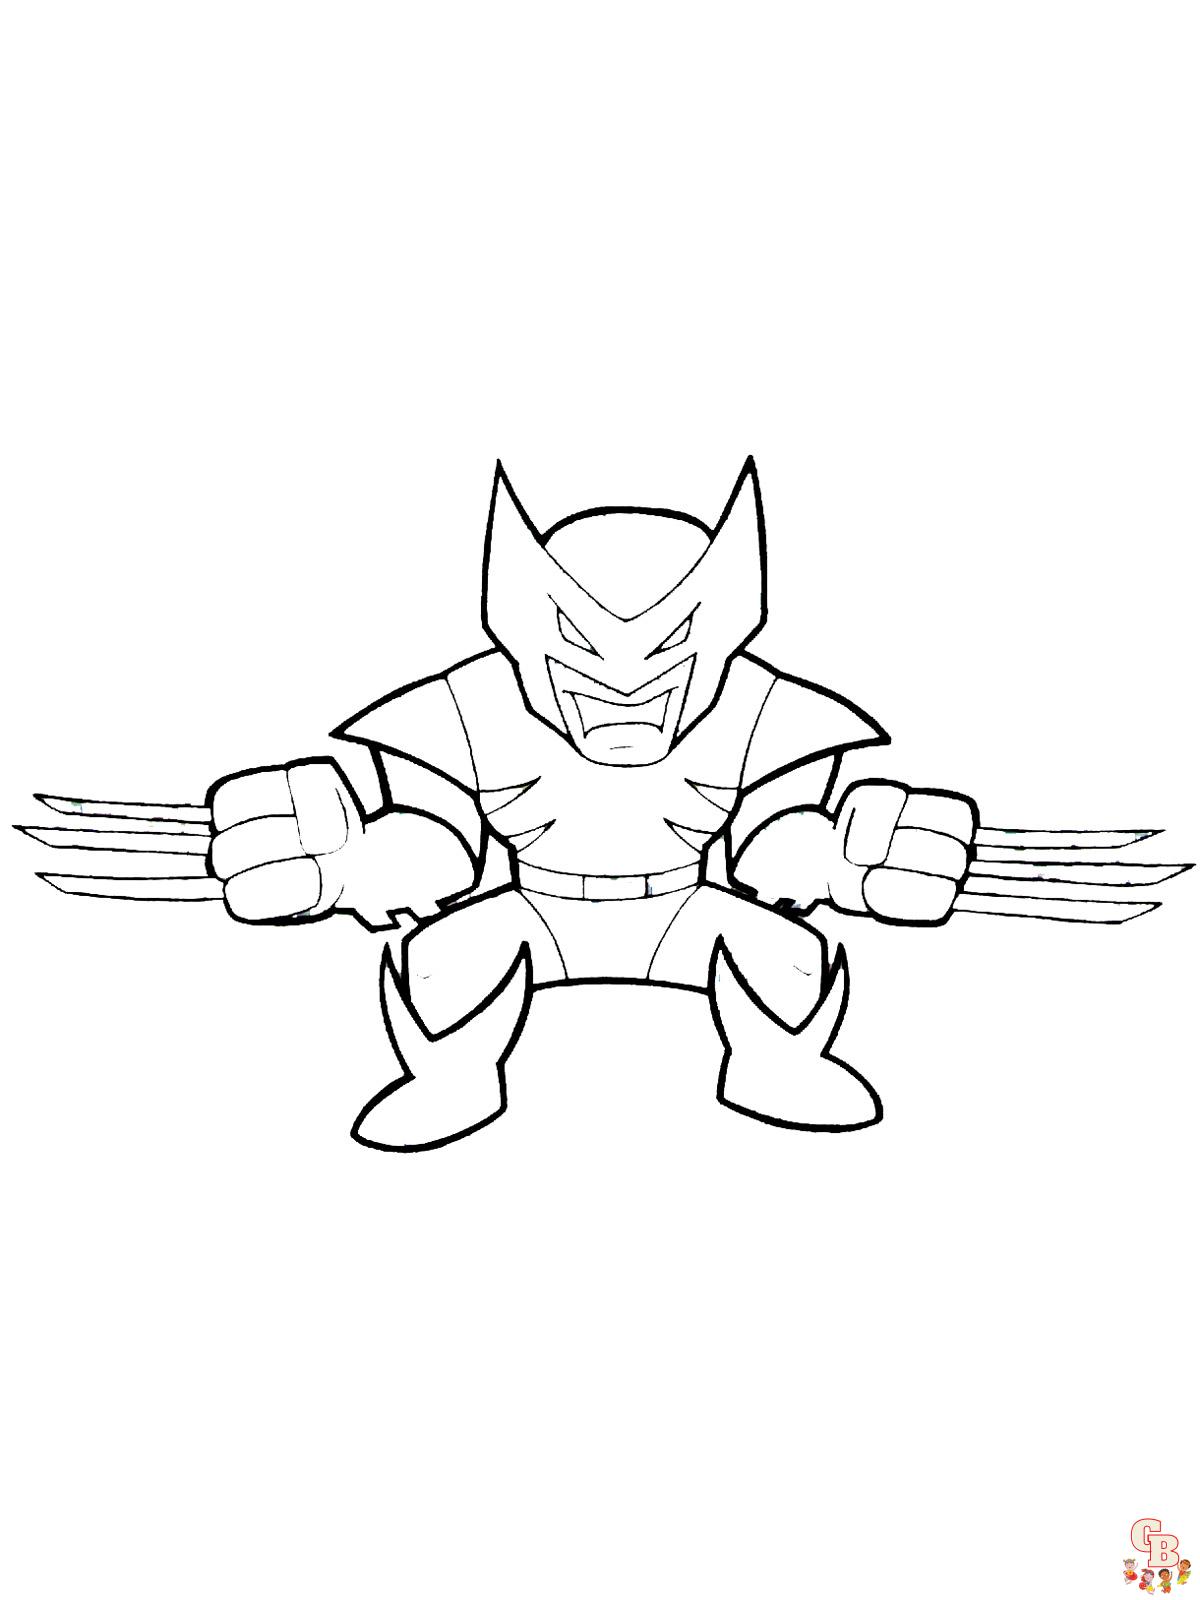 Wolverine Coloring Pages 4